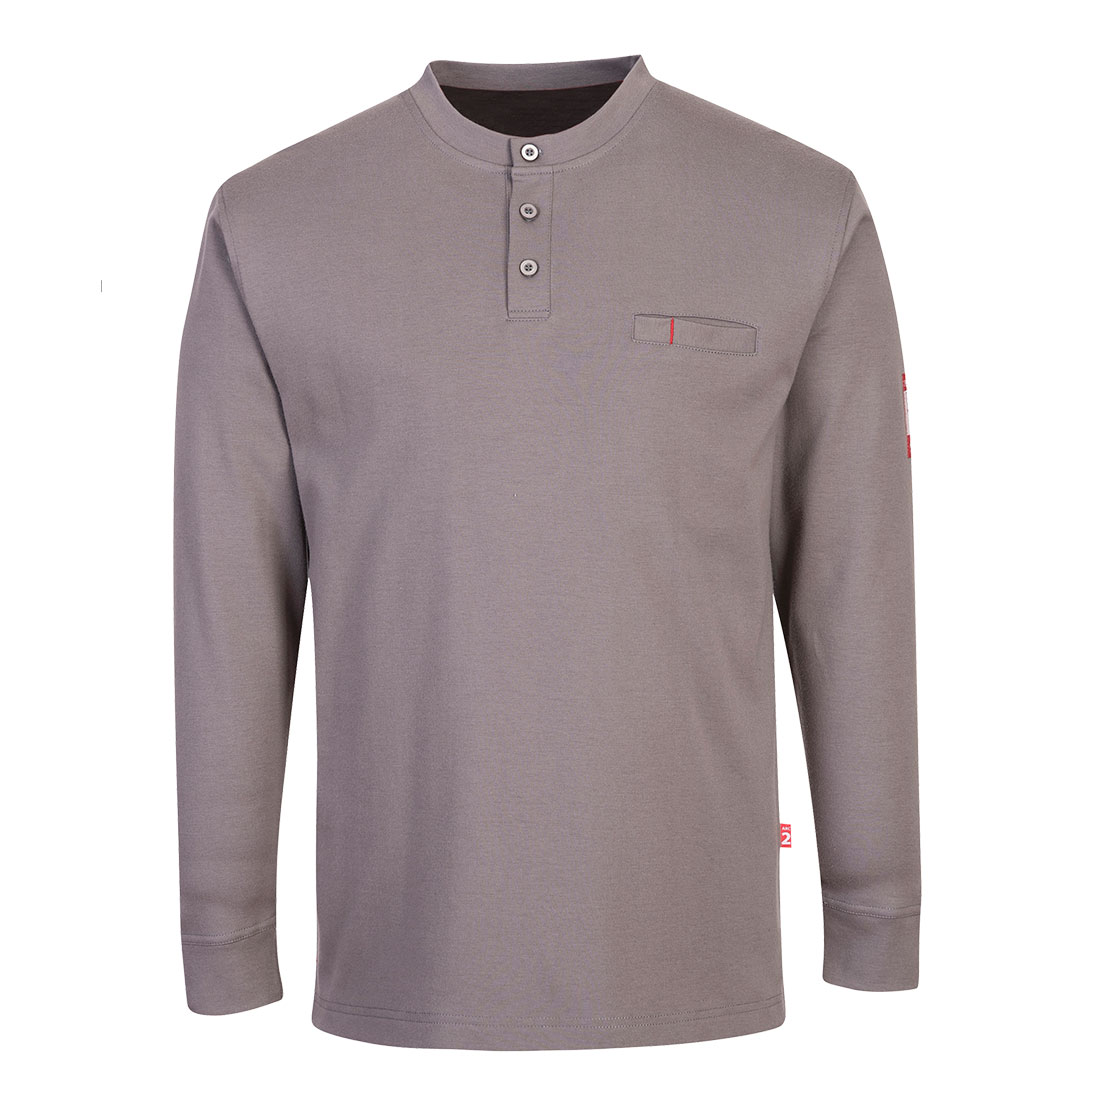 FR32 Portwest® Bizflame® Knit Flame-Resistant Anti-Static Henley Shirt- gray